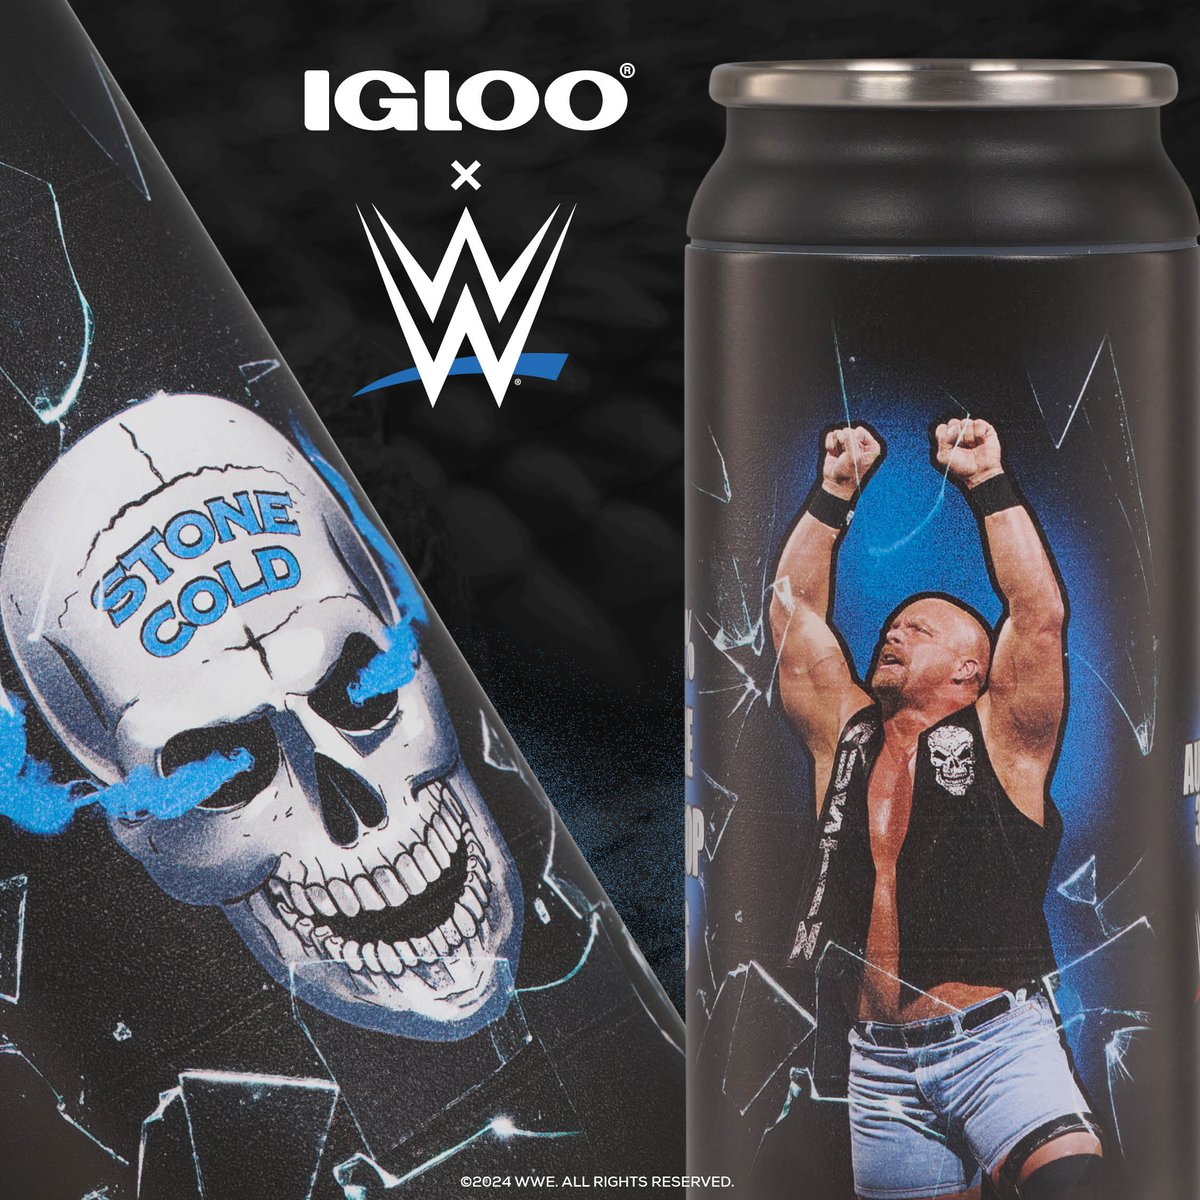 Make your drink 'Stone Cold'! New @WWEUniverse stainless steel cans drop today. #igloocoolers Shop now: bit.ly/3xlQPTU